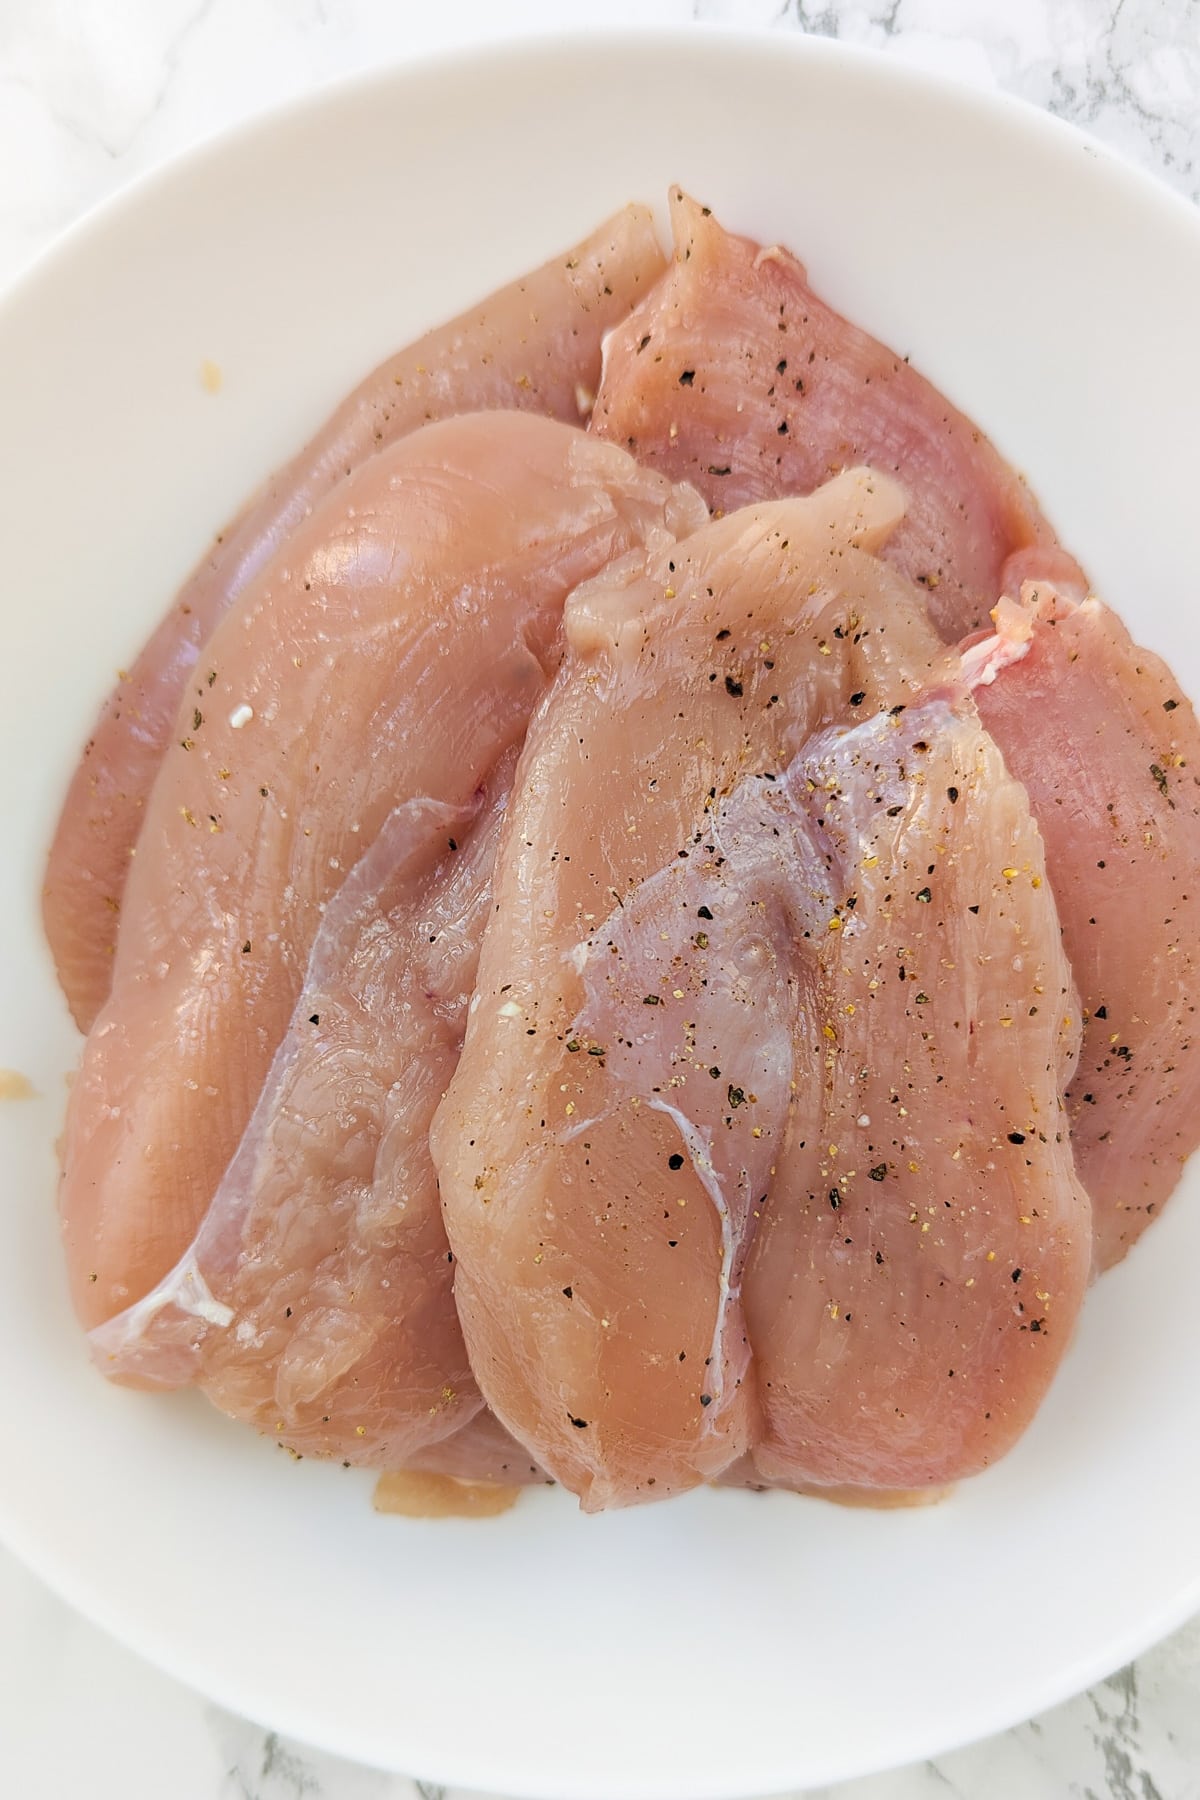 Top view of seasoned chicken breasts in a white bowl.